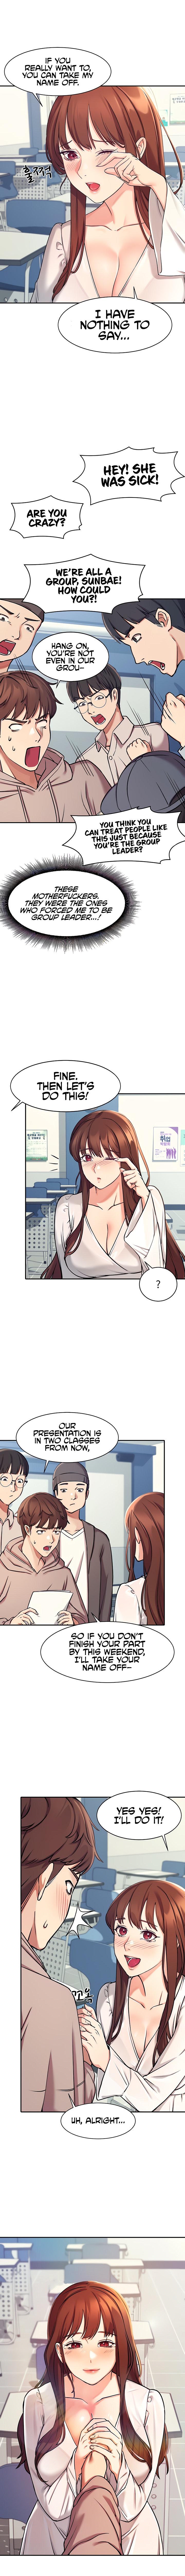 Is There No Goddess in My College? Ch.12/? 11